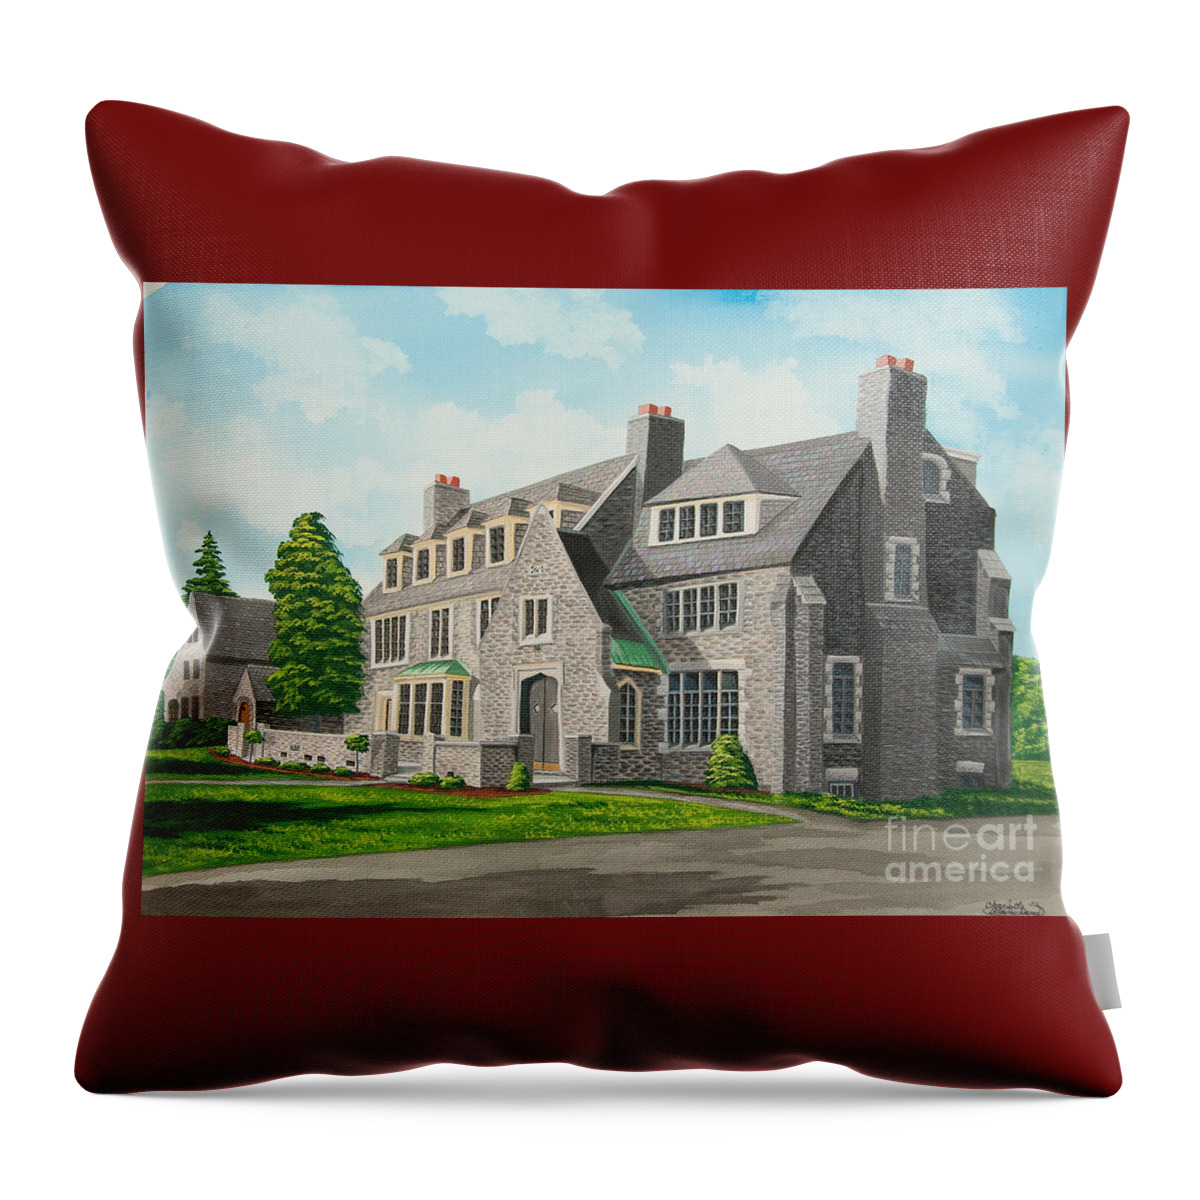 Kappa Delta Rho Frat House Throw Pillow featuring the painting Kappa Delta Rho South View by Charlotte Blanchard